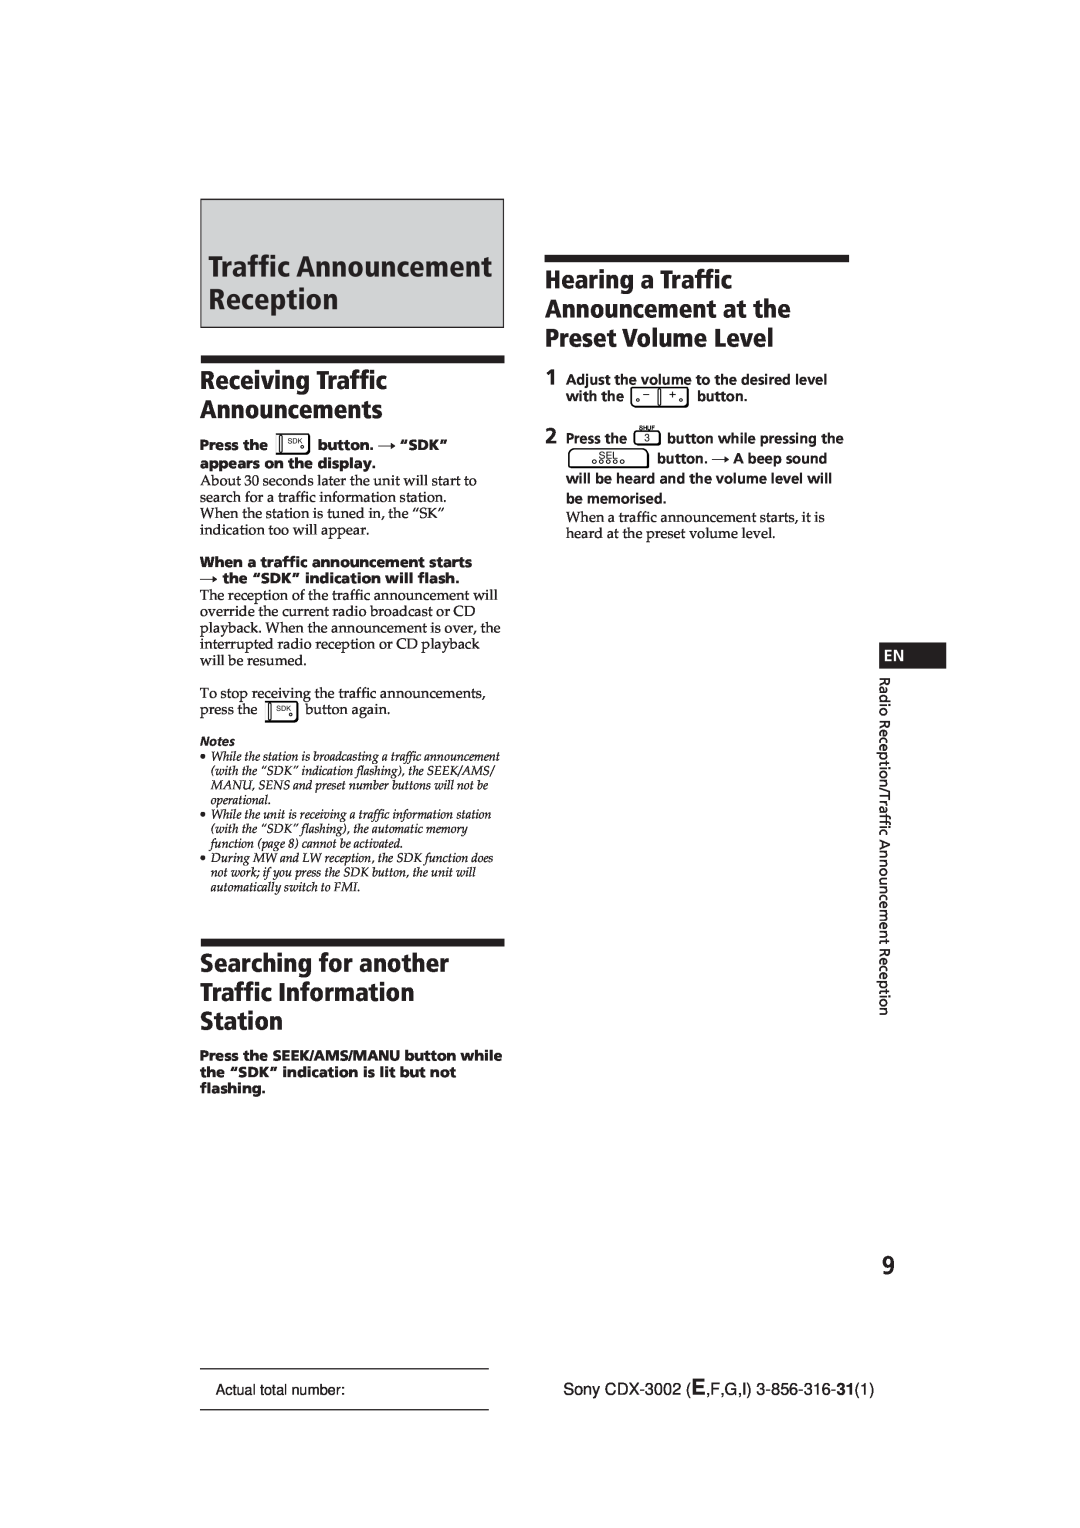 Sony CDX-3002 manual Traffic Announcement Reception, Receiving Traffic Announcements, Hearing a Traffic Announcement at the 